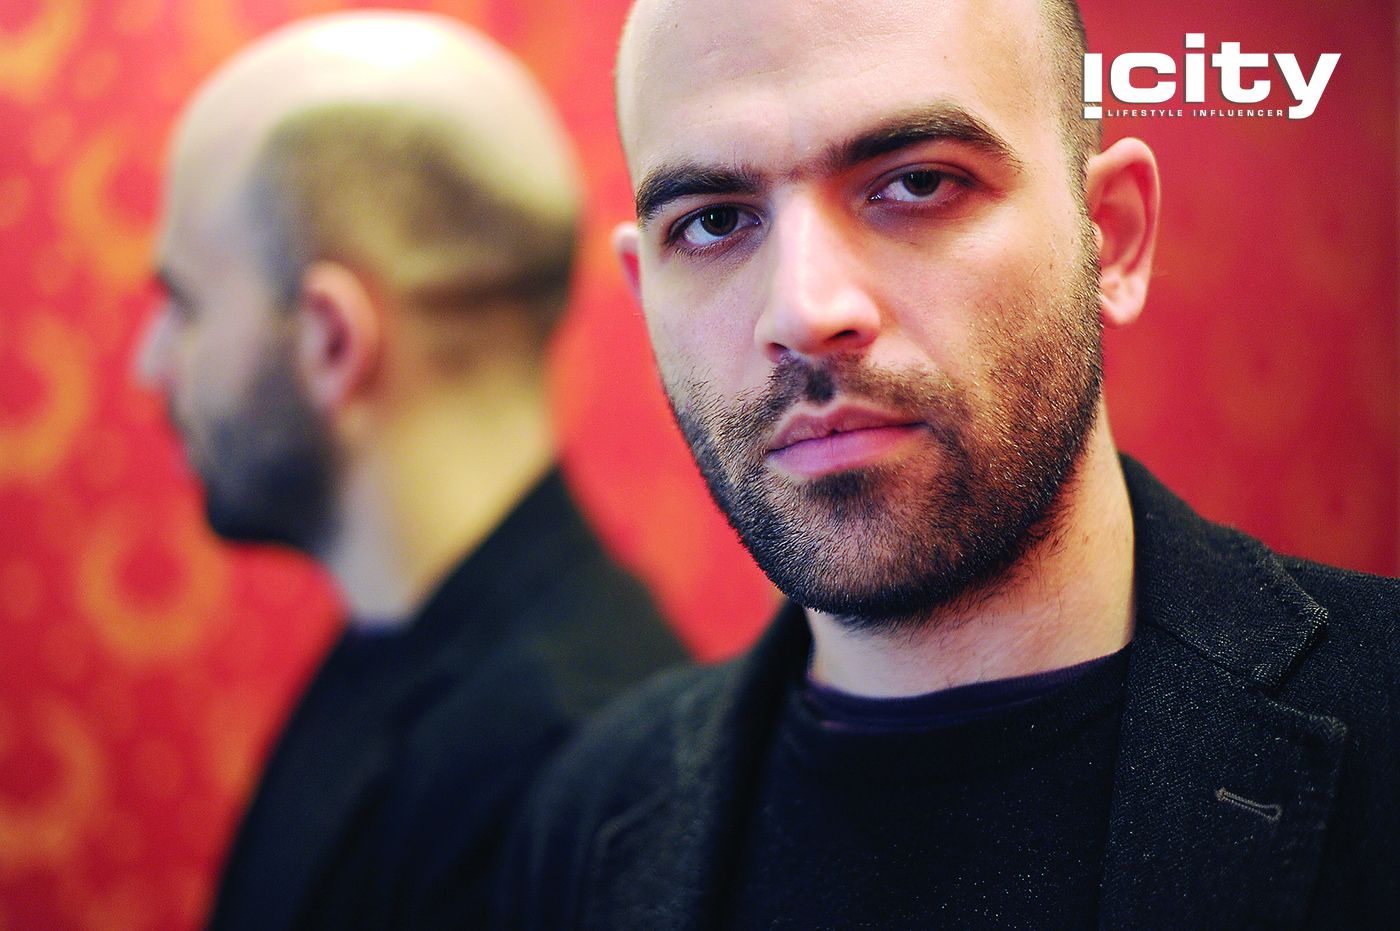 Italian writer Roberto Saviano gives an interview on March 17, 2010 in Rome. Saviano, 29, whose book "Gomorrah" has been translated into 42 languages, has lived under police protection for two years. The screen version of "Gomorrah," directed by Matteo Garrone, won second prize at the 2008 Cannes film festival and was in the running for an Oscar. His book, exposes the workings of the powerful Naples mafia, the Camorra.      AFP PHOTO / CHRISTOPHE SIMON (Photo credit should read CHRISTOPHE SIMON/AFP/Getty Images)